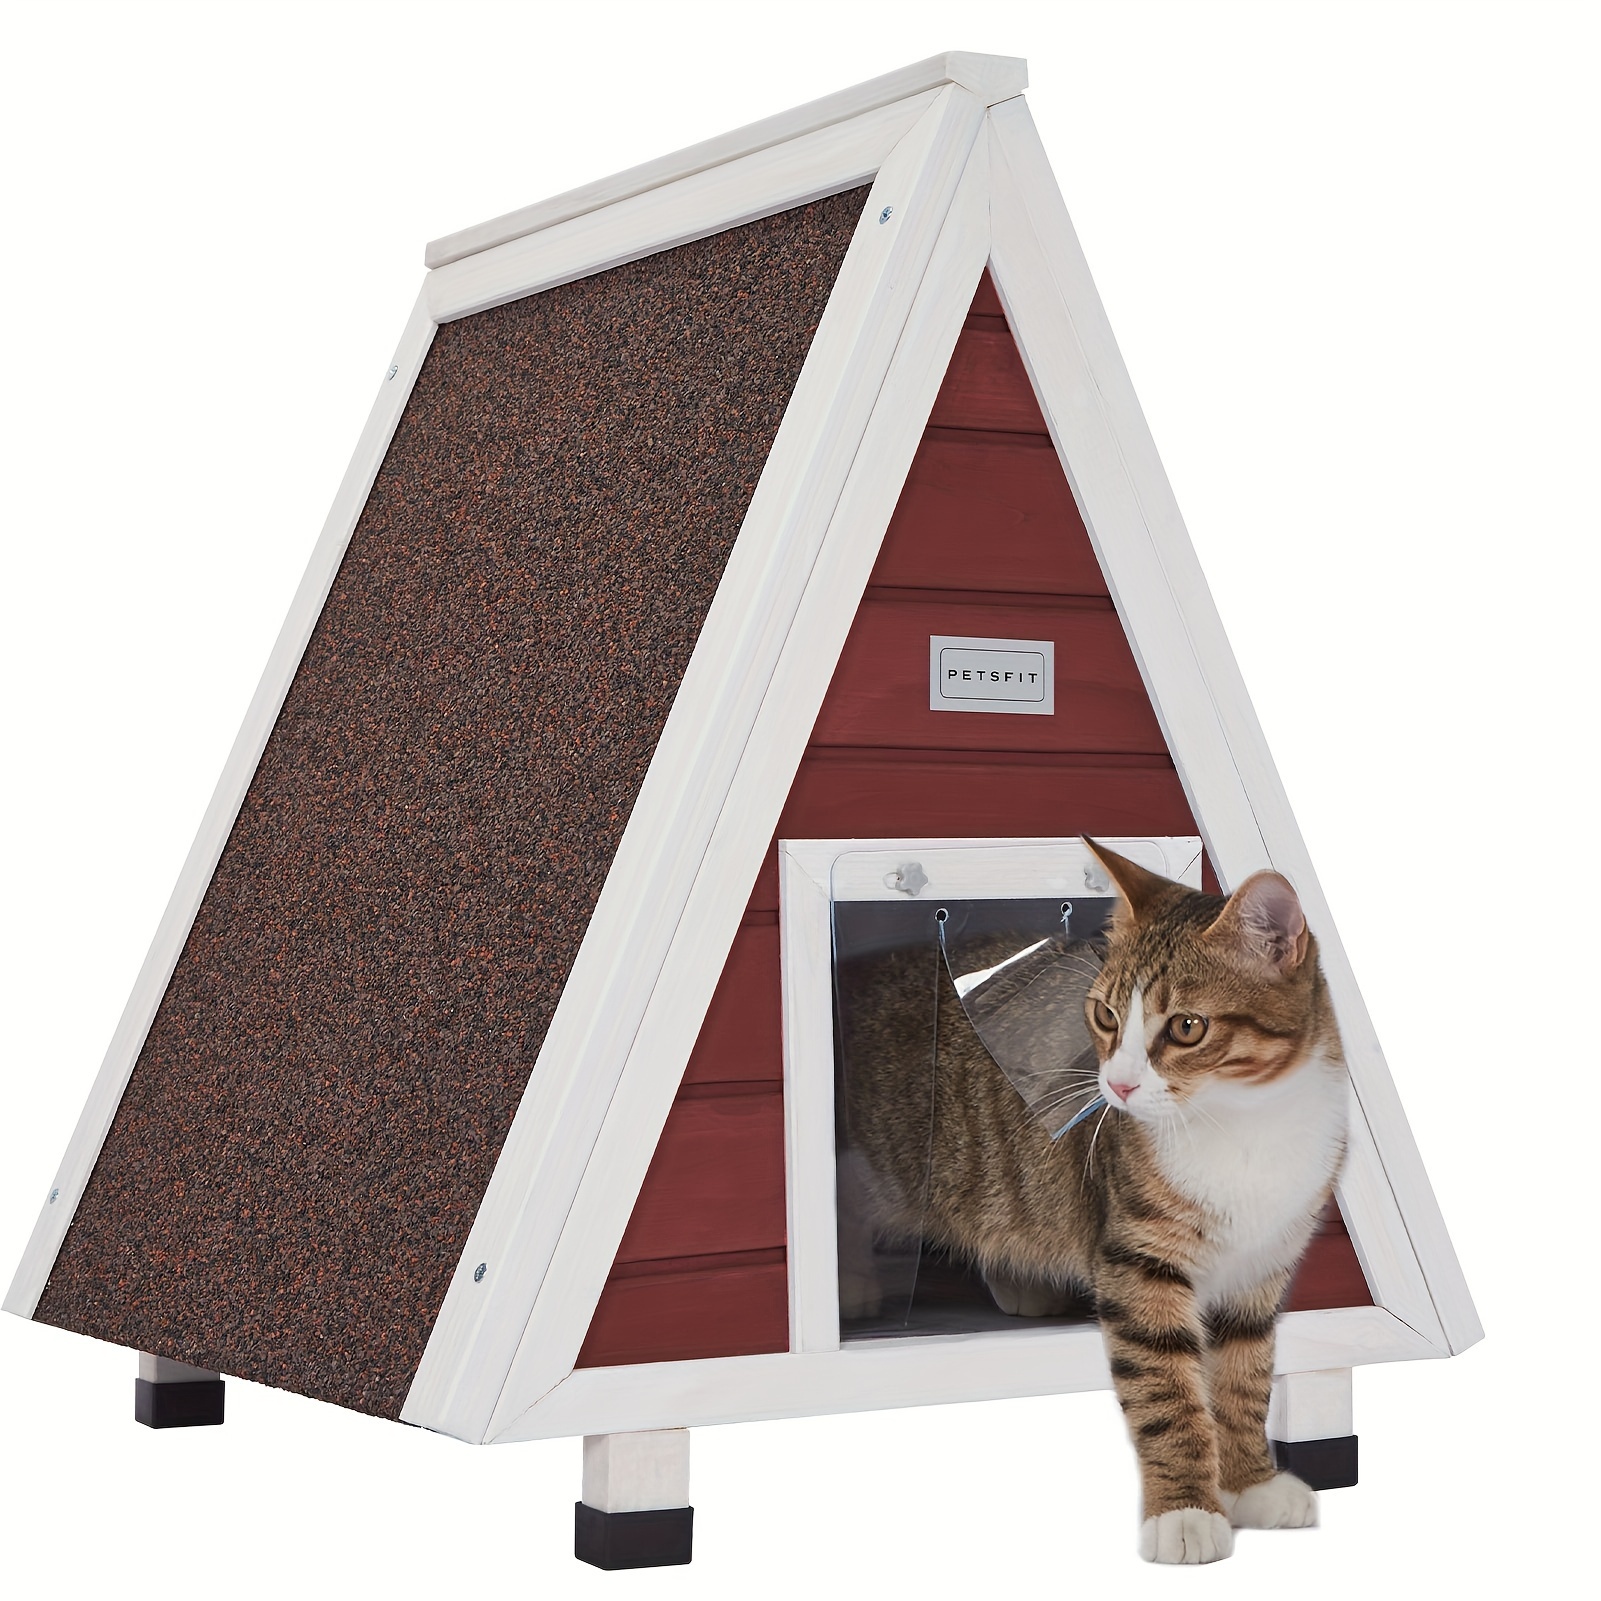 

Petsfit Cat House Outdoor, Solid Wood Cat House With Feet, Moisture-proof Design